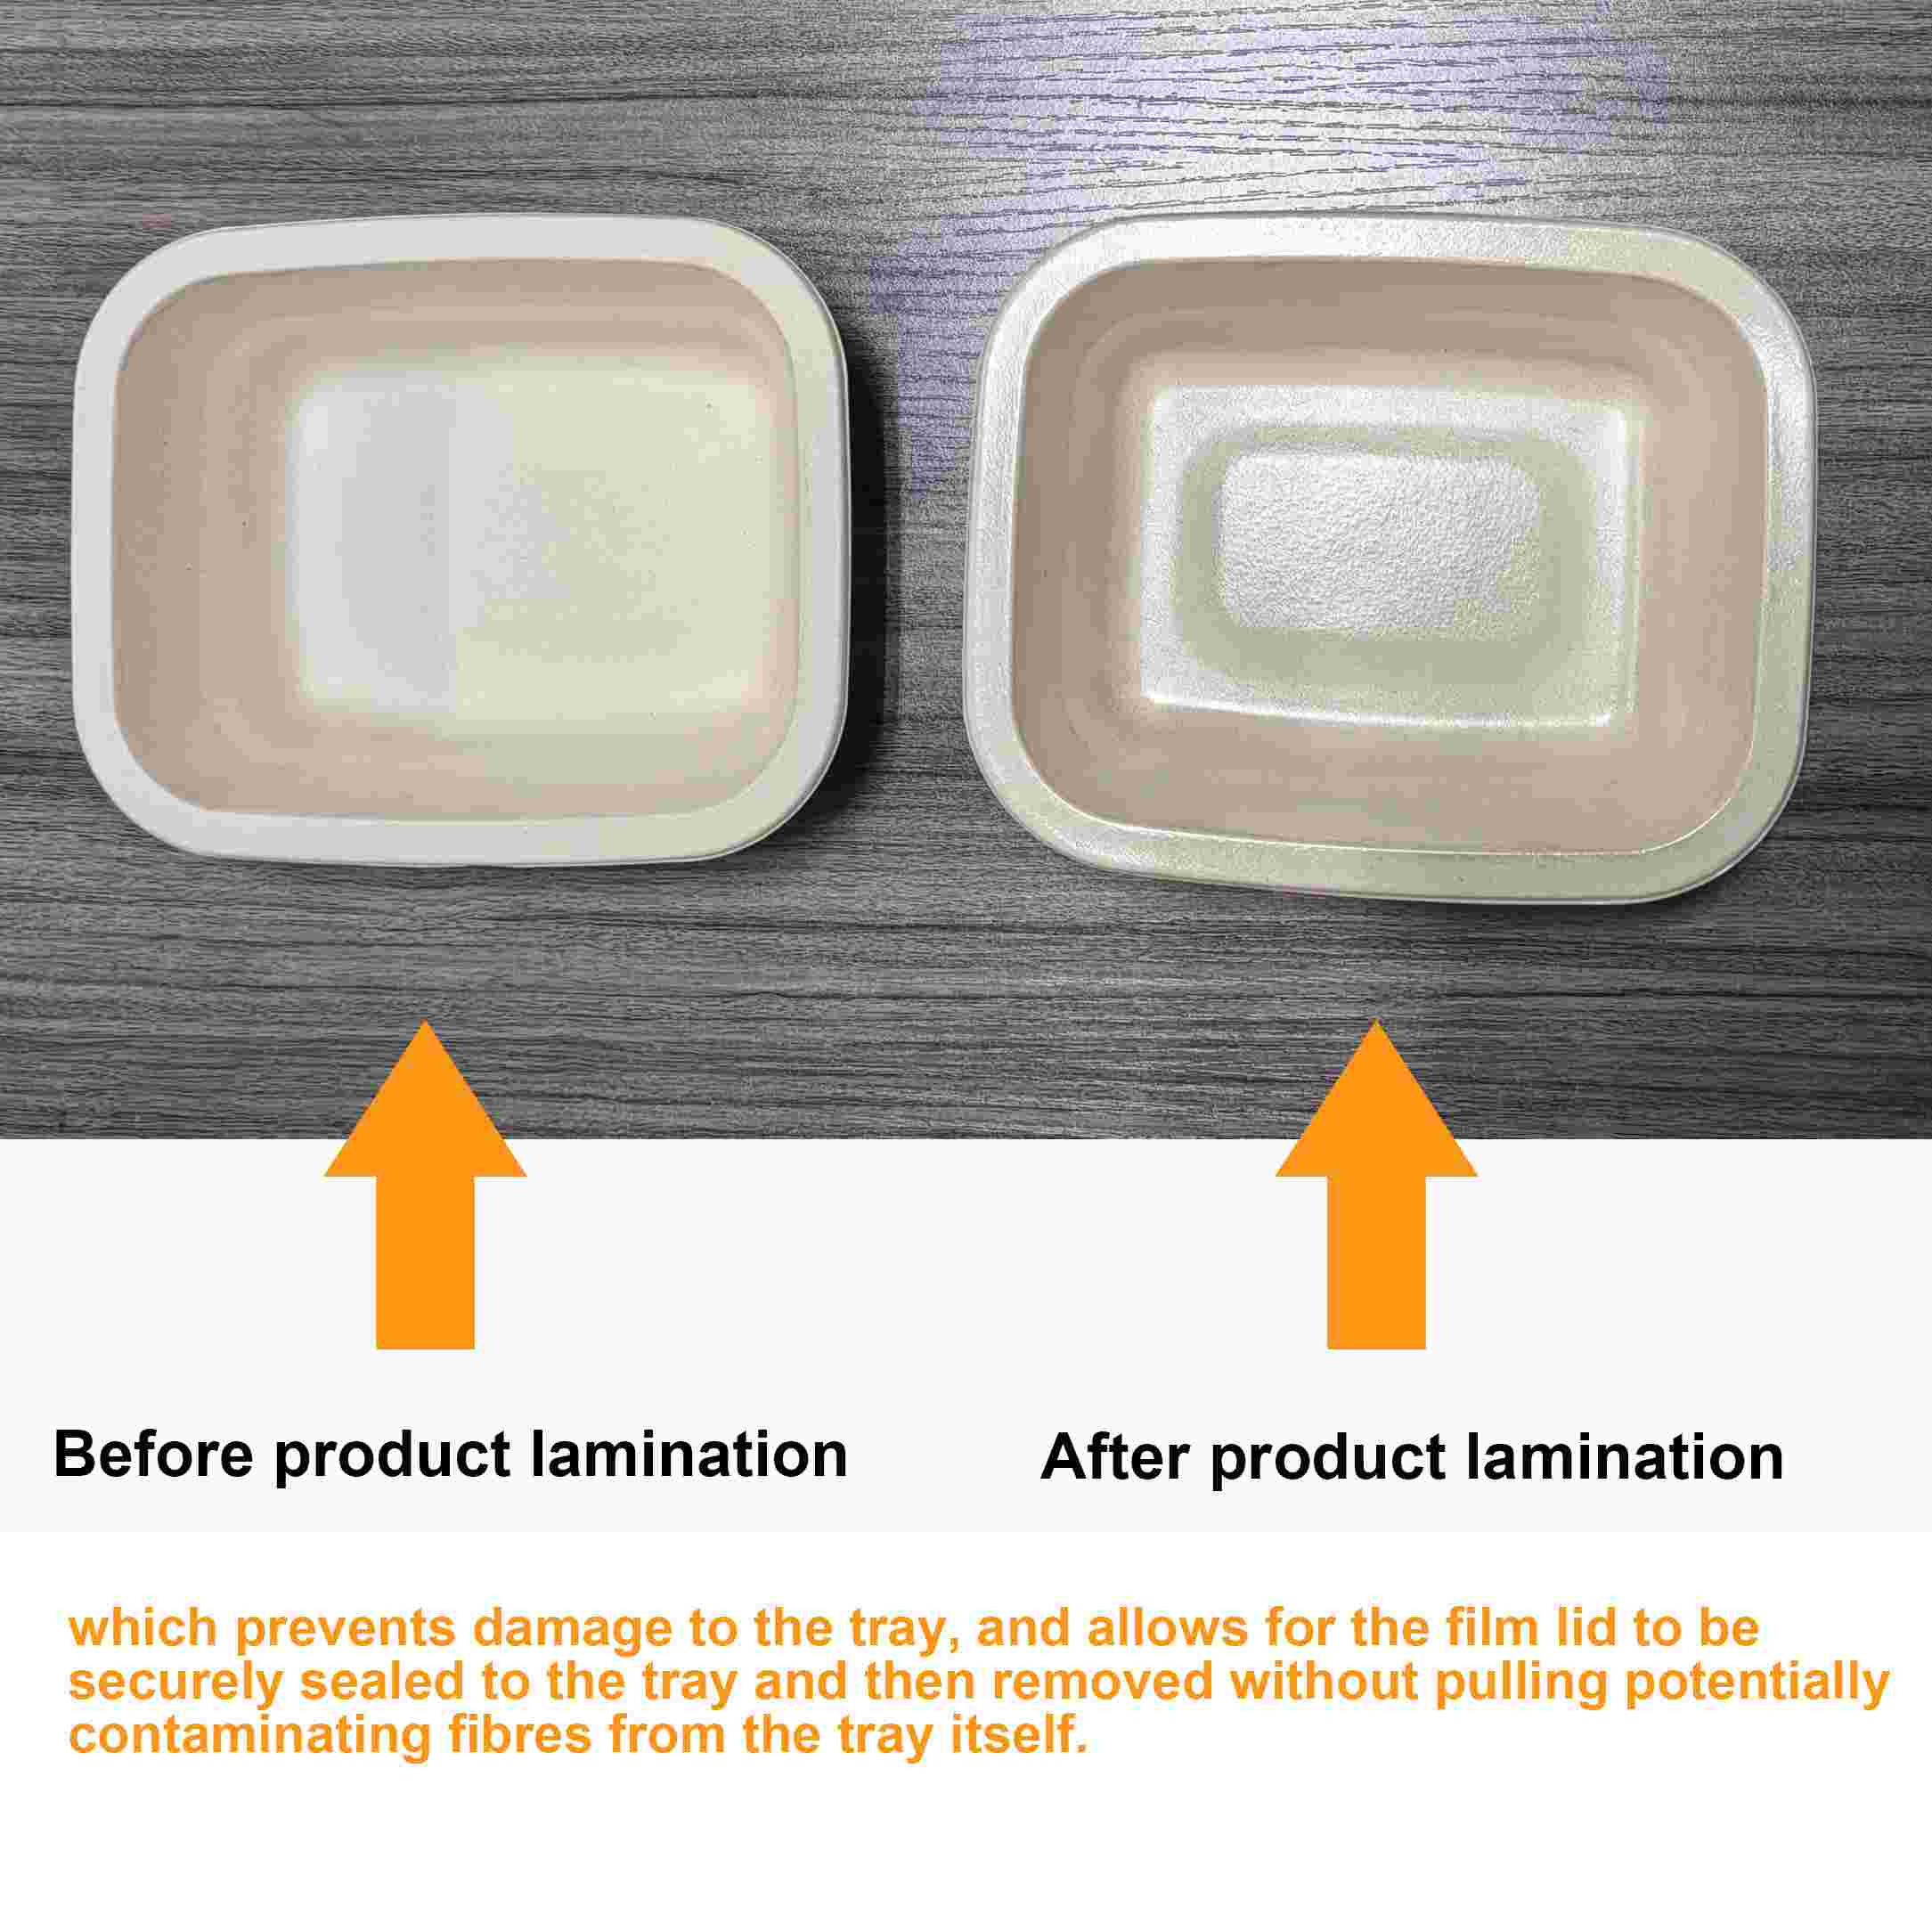 Compostable Biodegradable food tray packaging